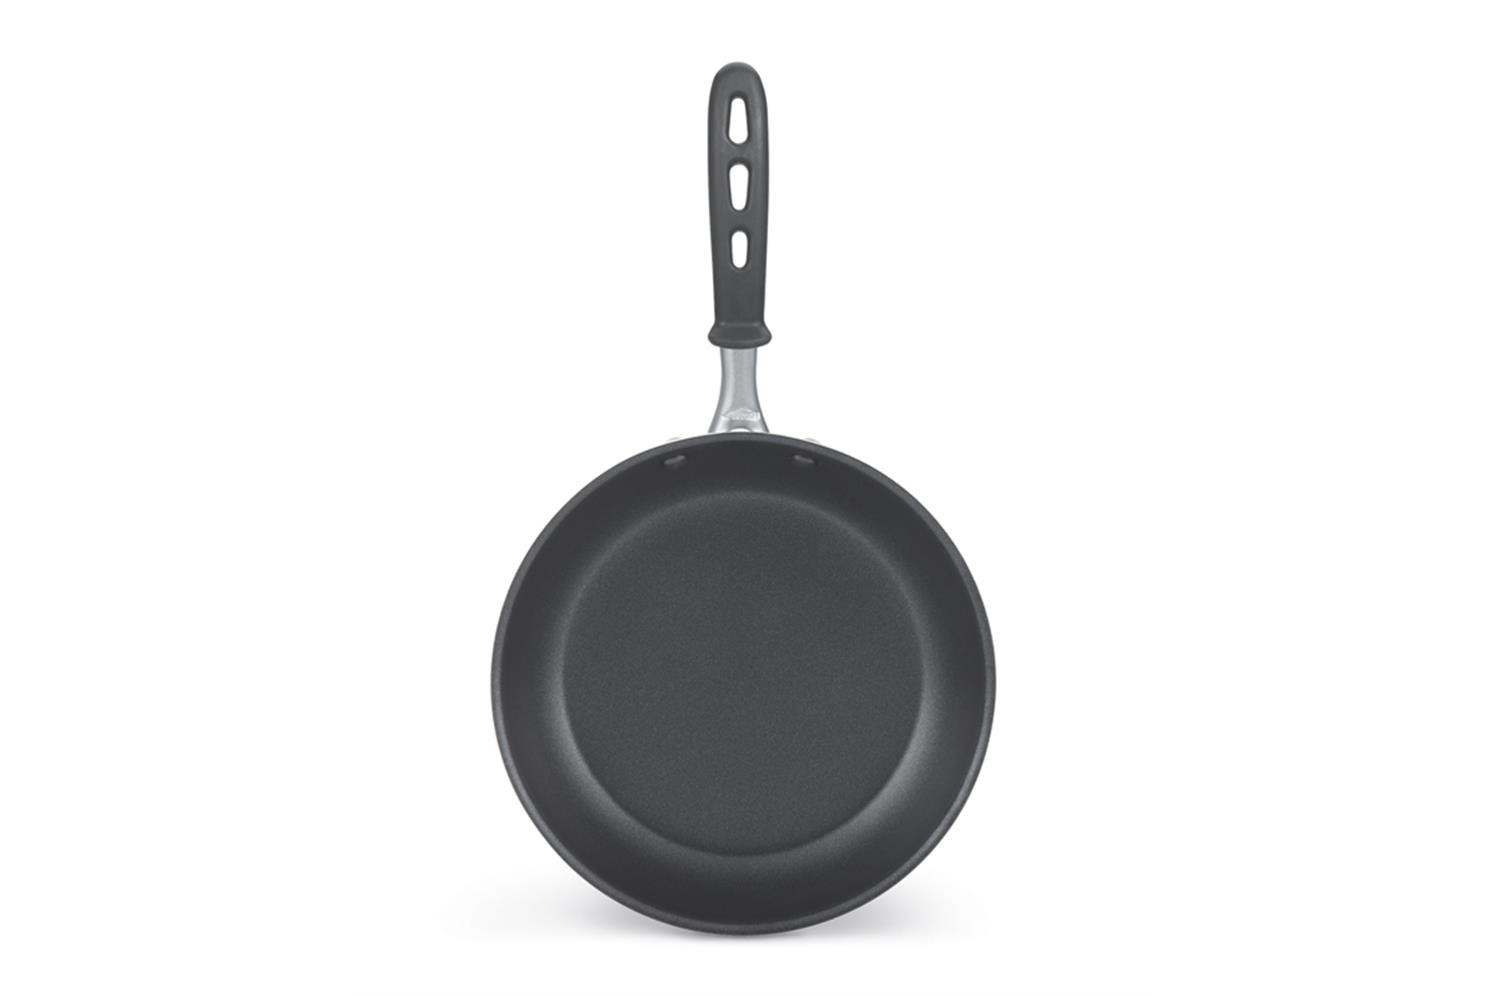 Vollrath 67930 Wear-Ever Fry Pans with CeramiGuard II Interior with TriVent Handle